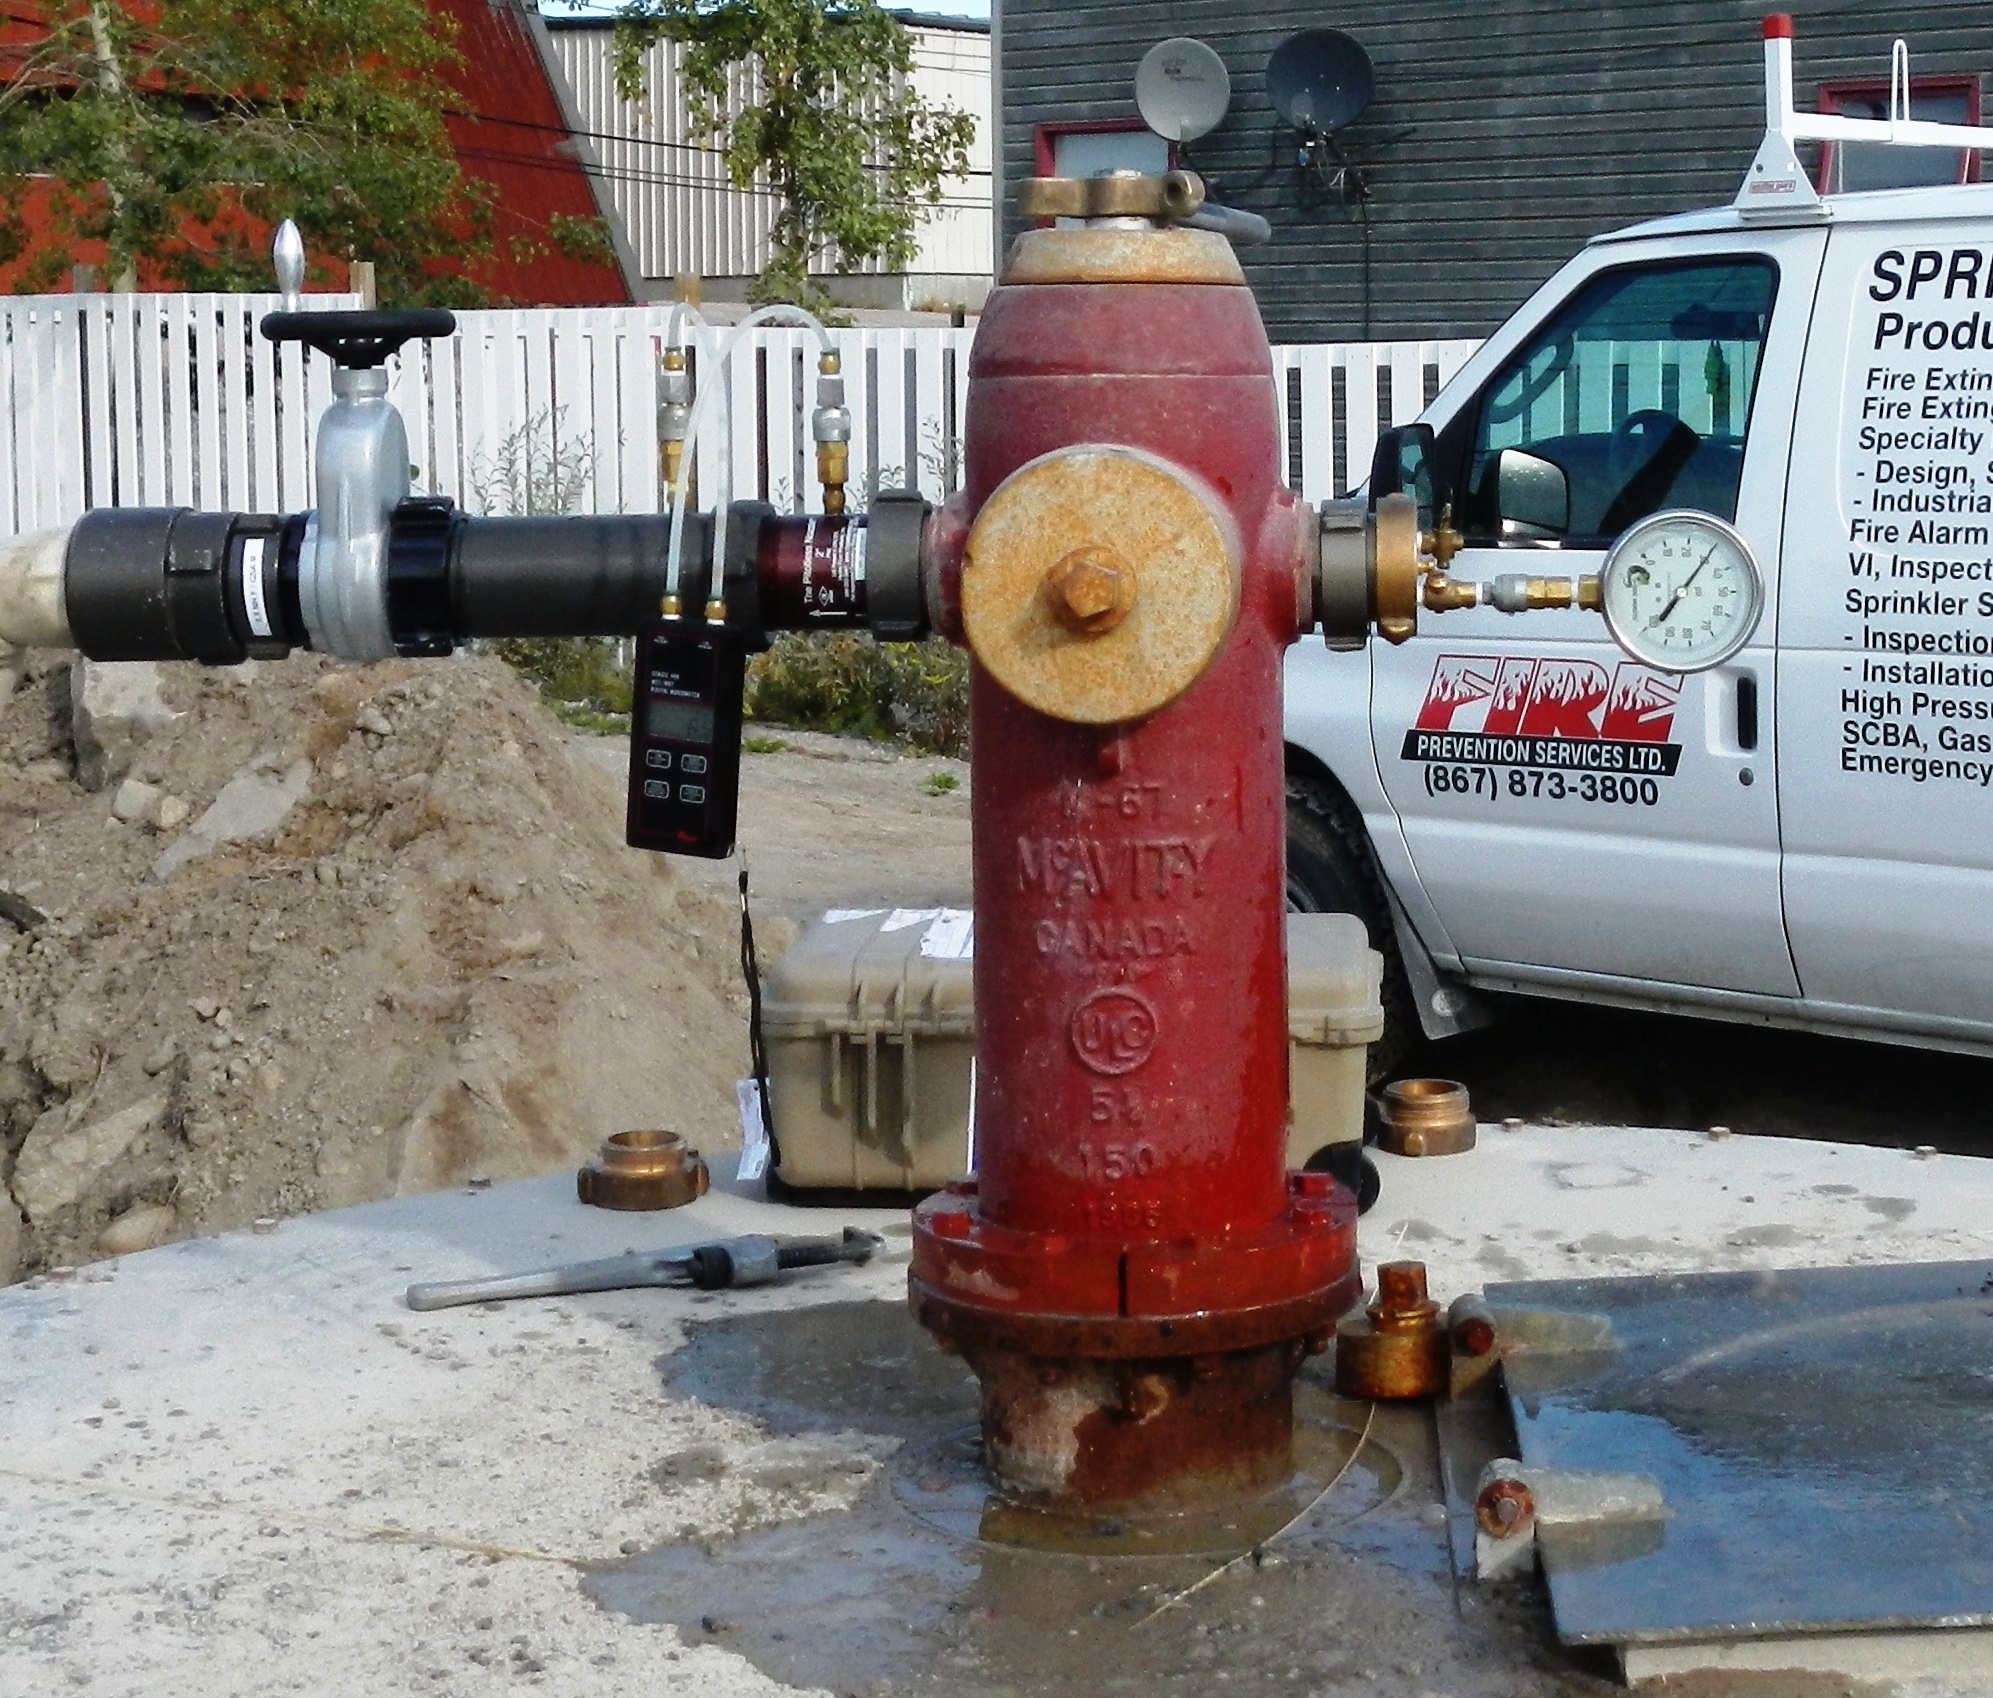 municipal-hydrant-flow-testing-programs-fire-prevention-services-2016